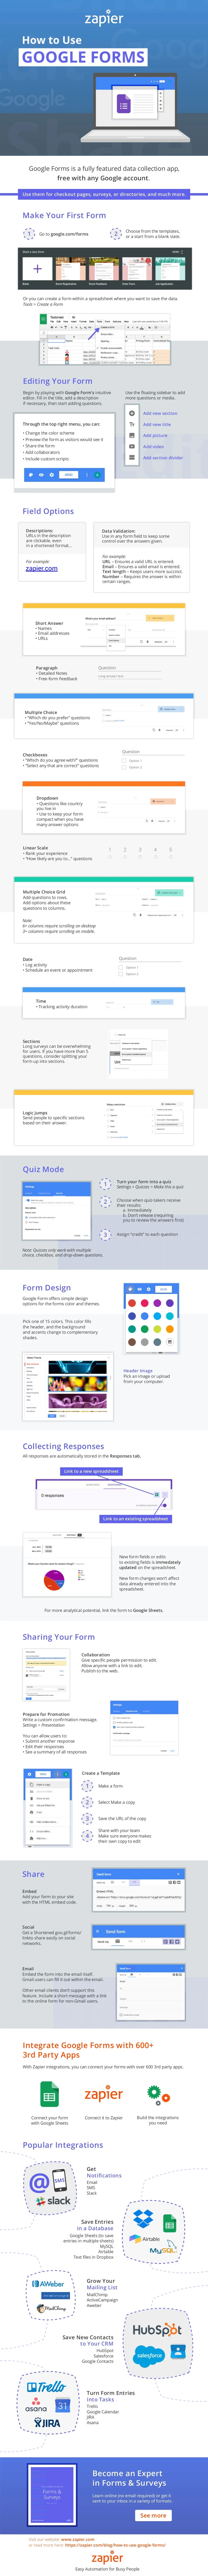 Google Forms Guide: Everything You Need to Make Great Forms for Free - infographic